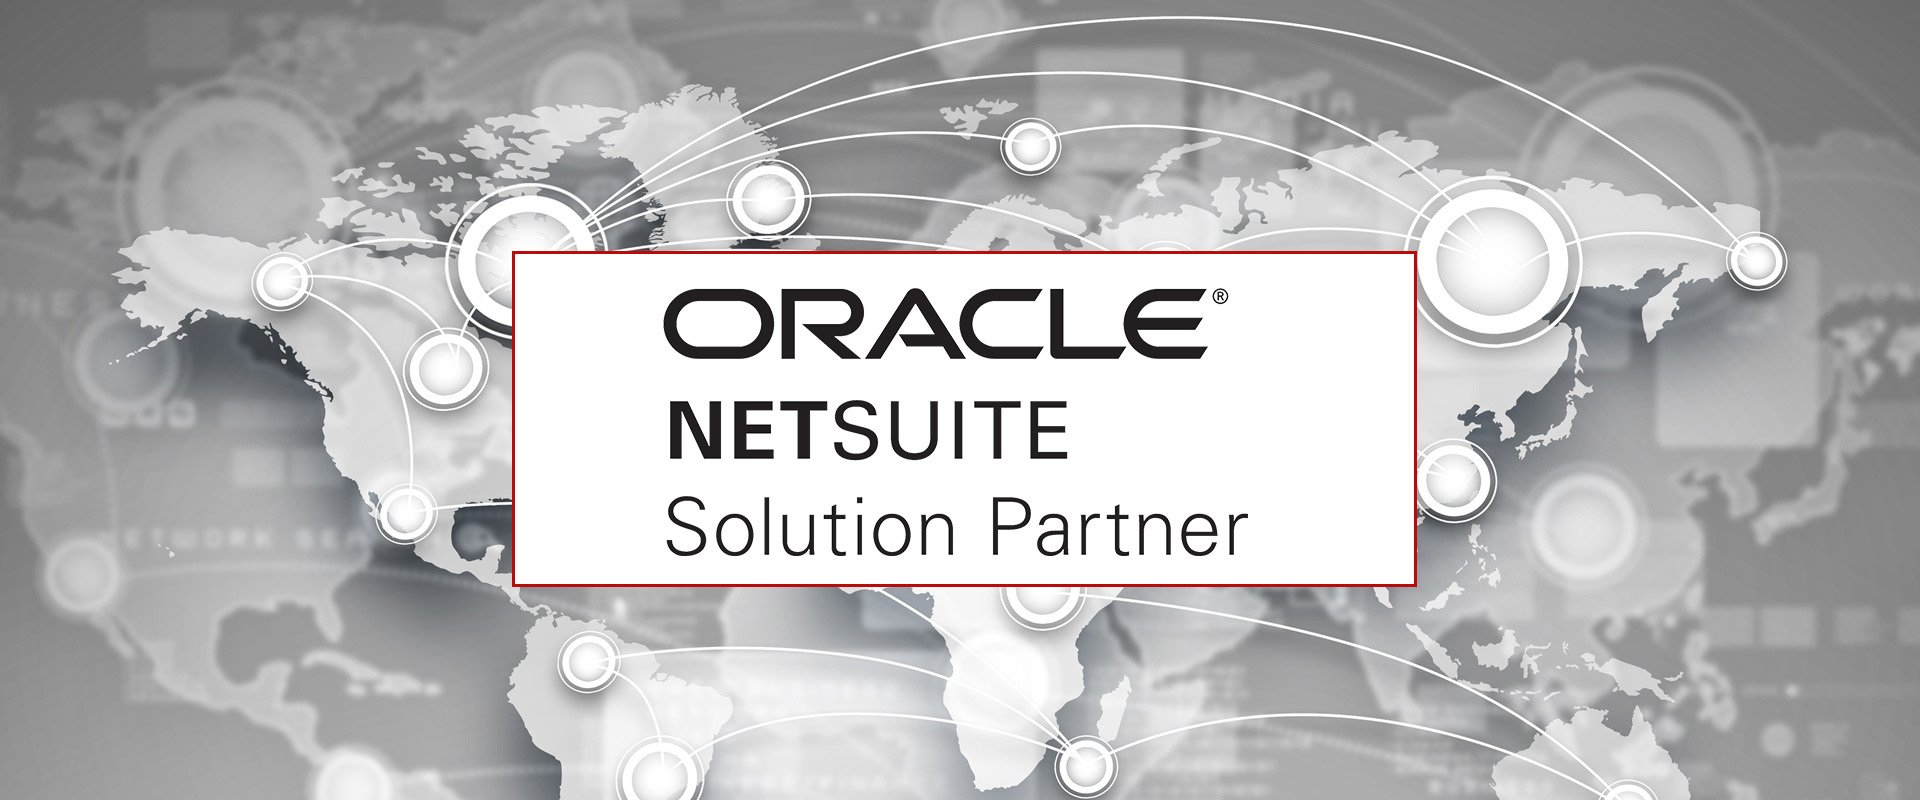 ERP Advisors Group Educates With a No-Holds-Barred Summary of Oracle  NetSuite | Newswire